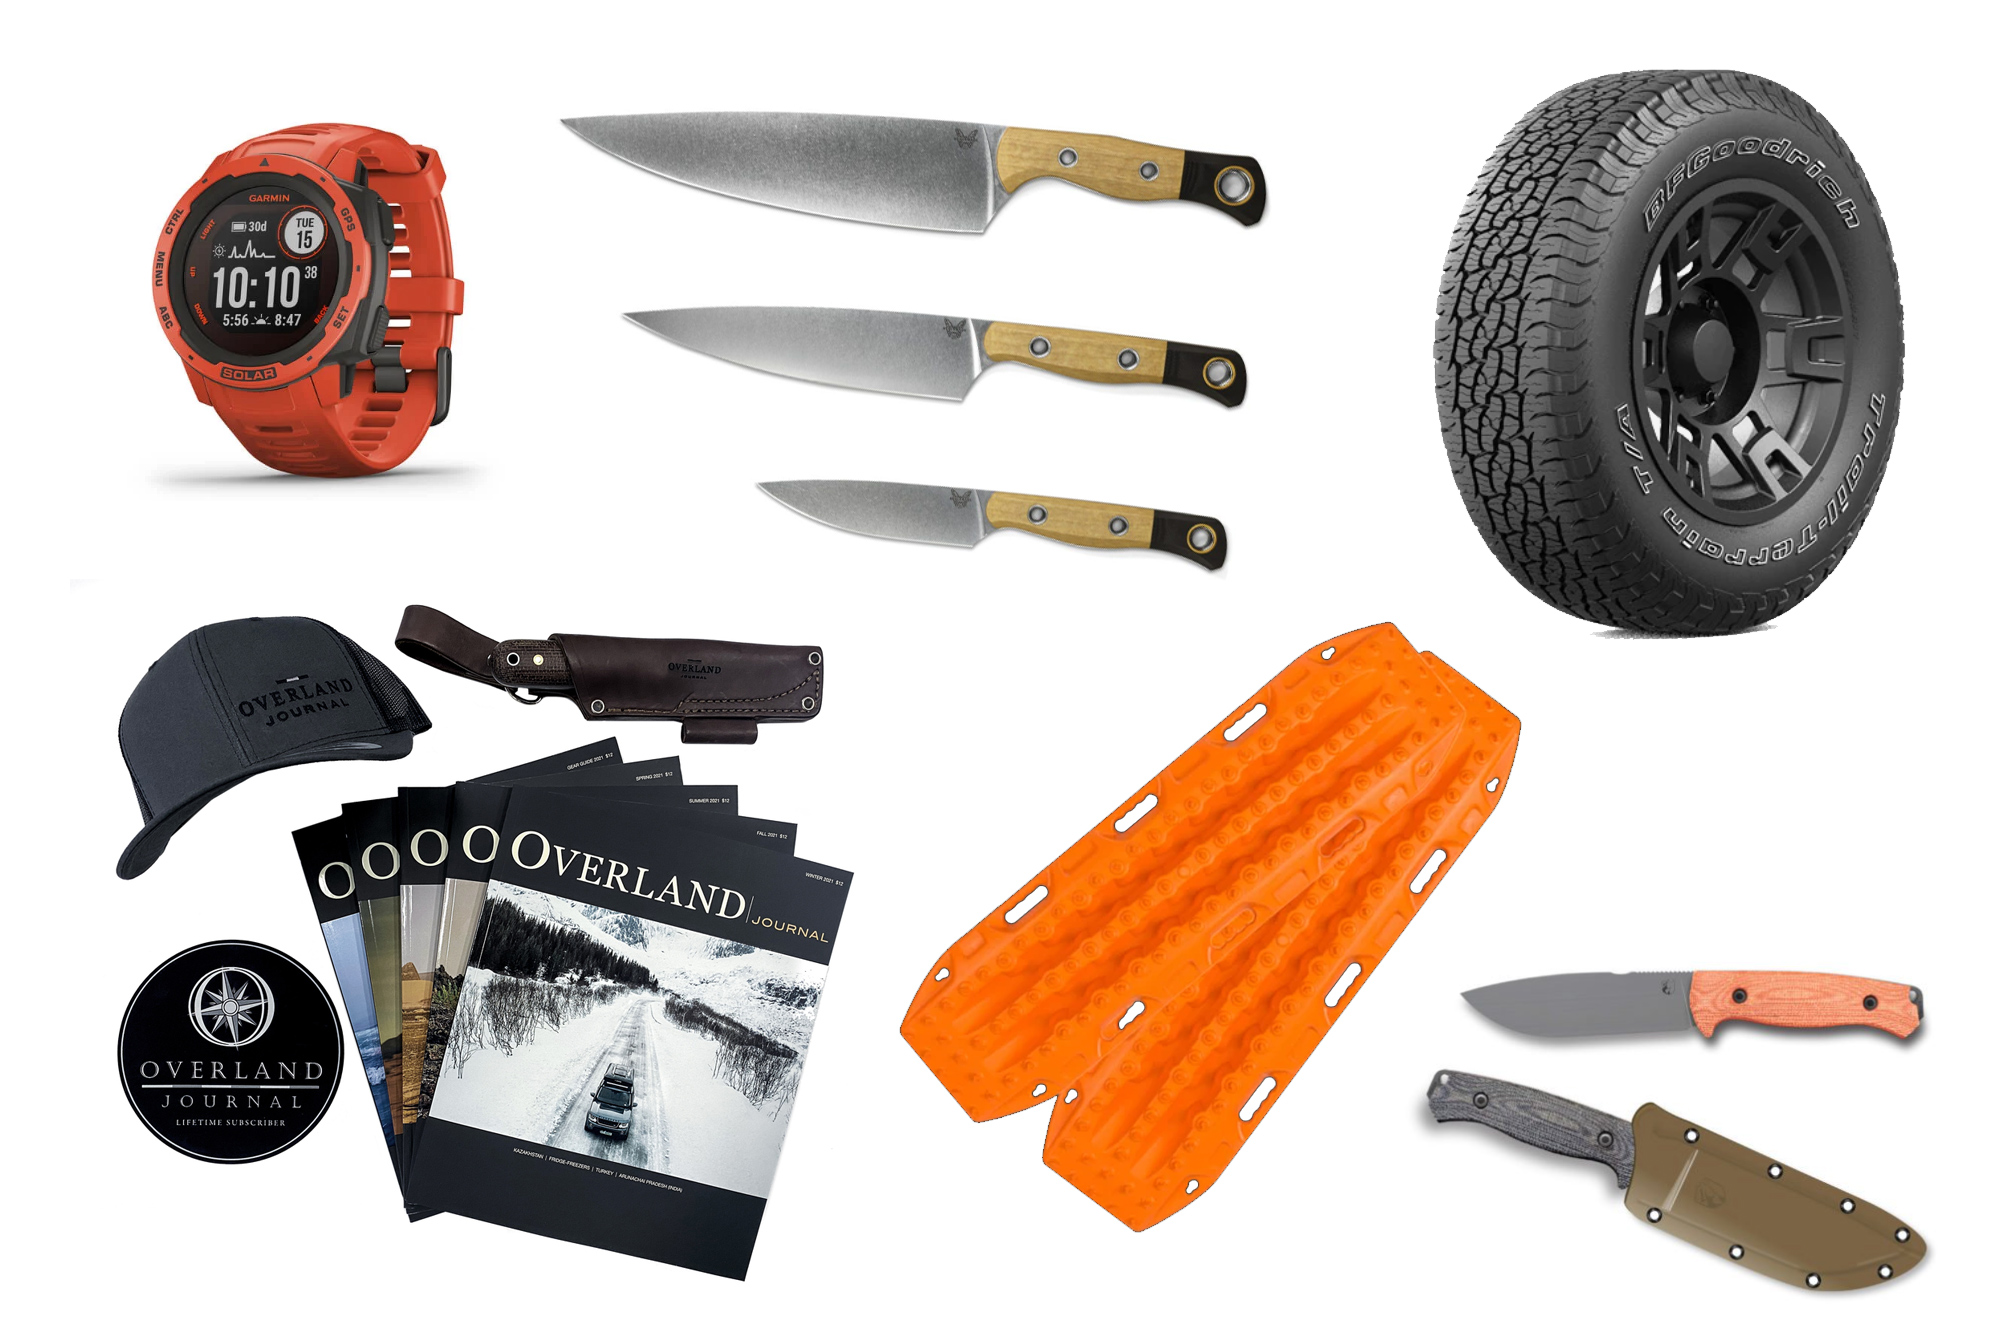 15 Under $15: Practical EDC Gift Ideas for Him